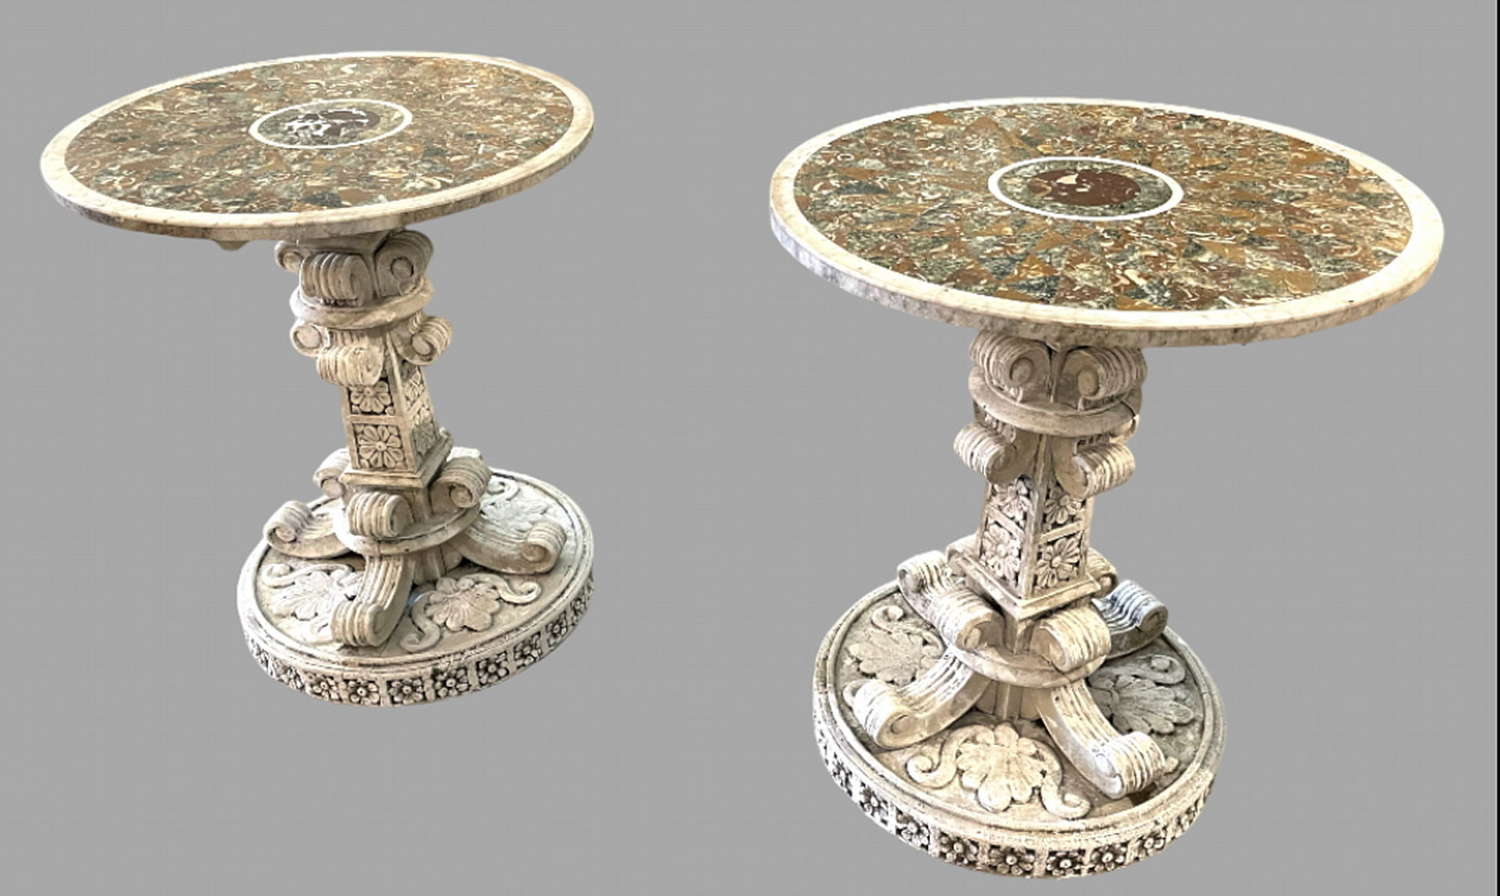 A Pair Of Decorative Side Tables